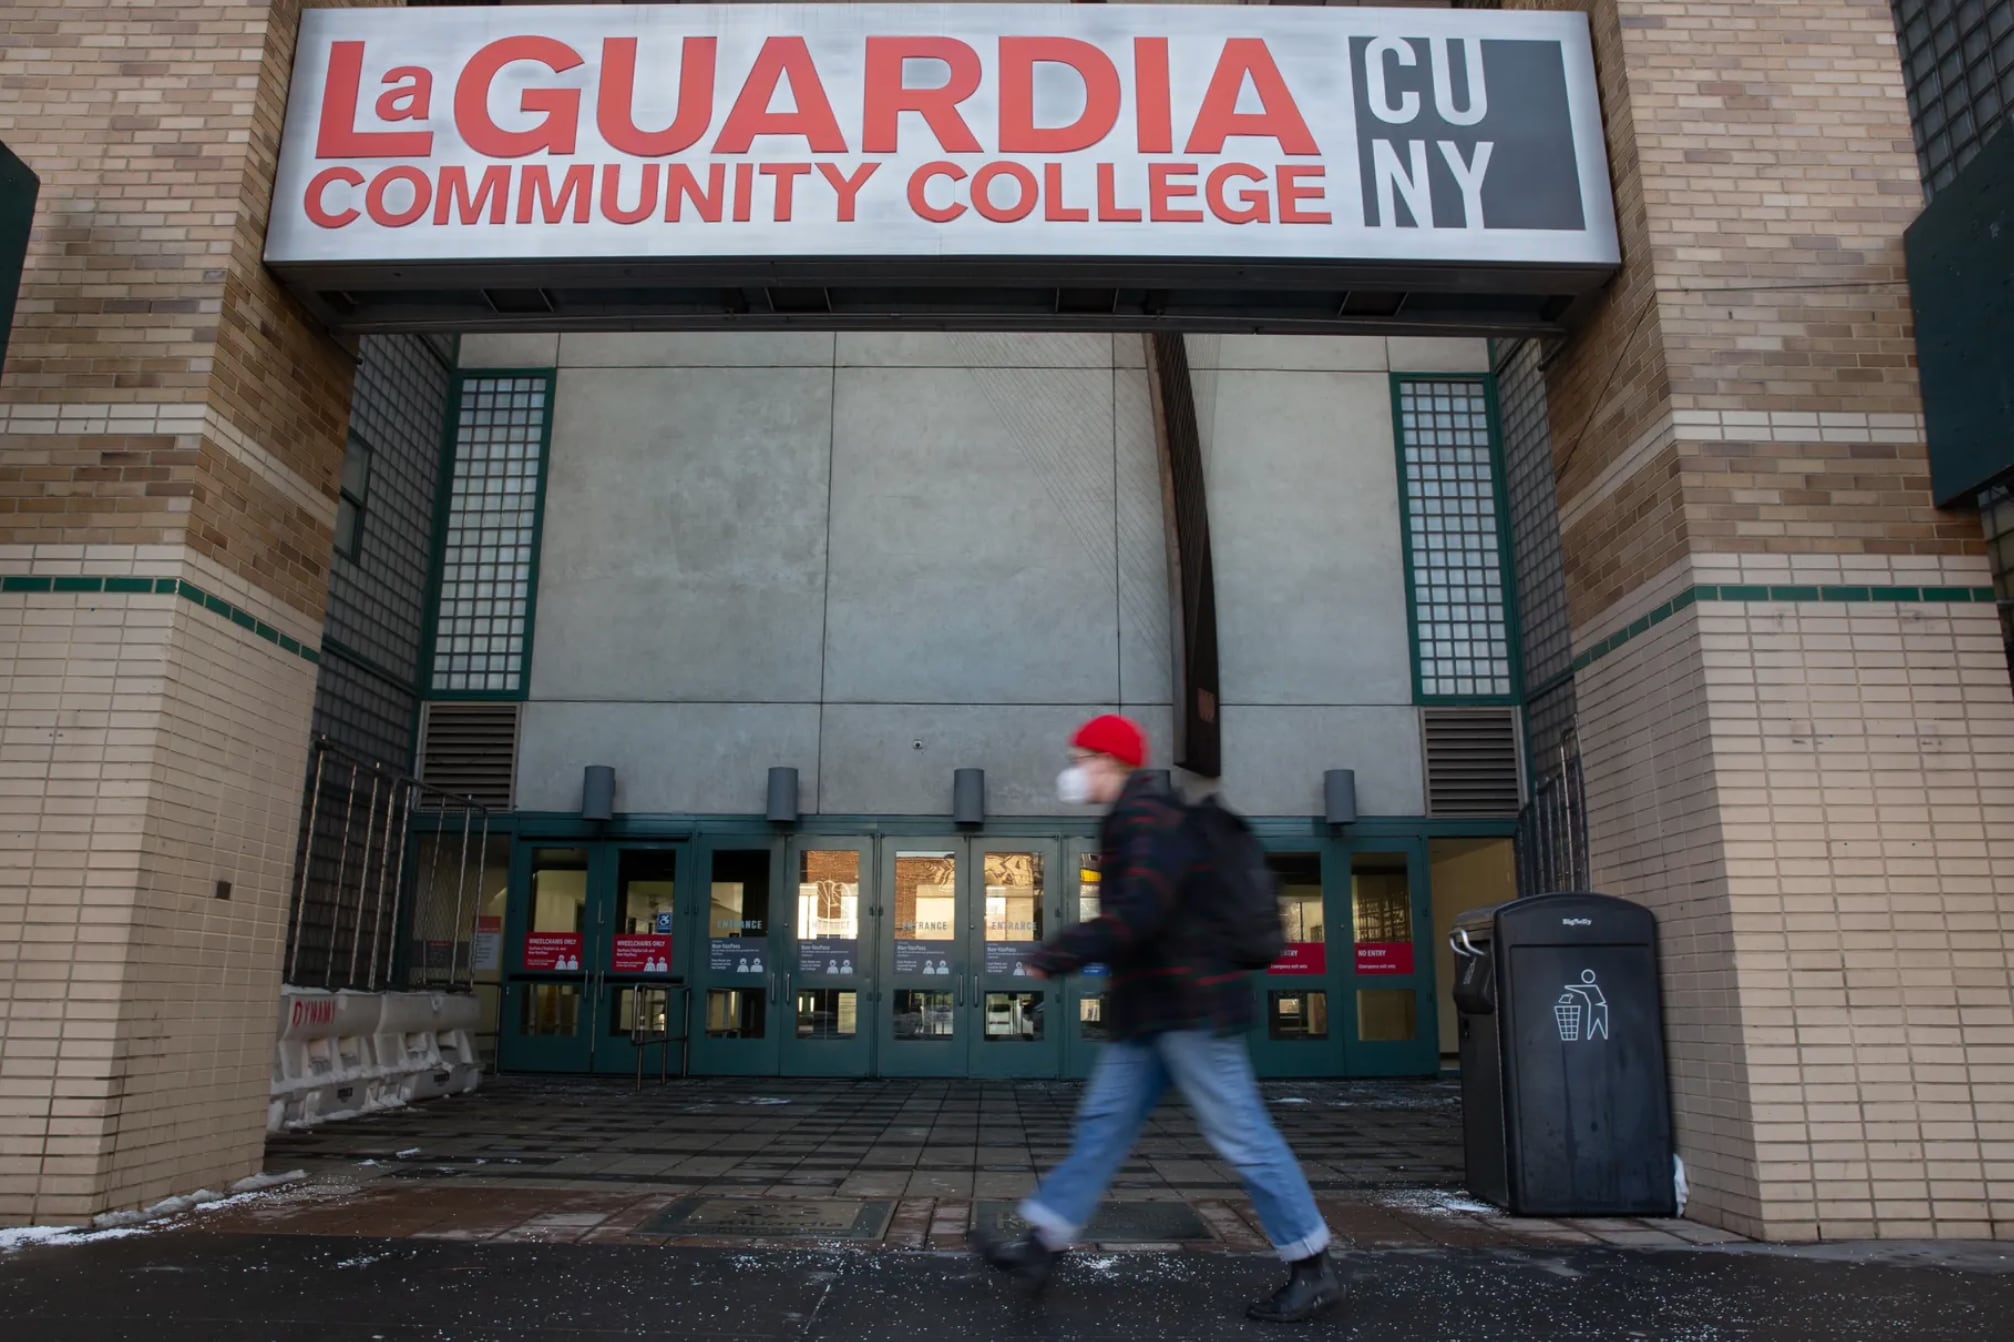 A person walks by the entrance of LaGuardia Community College, wearing a red beanie.